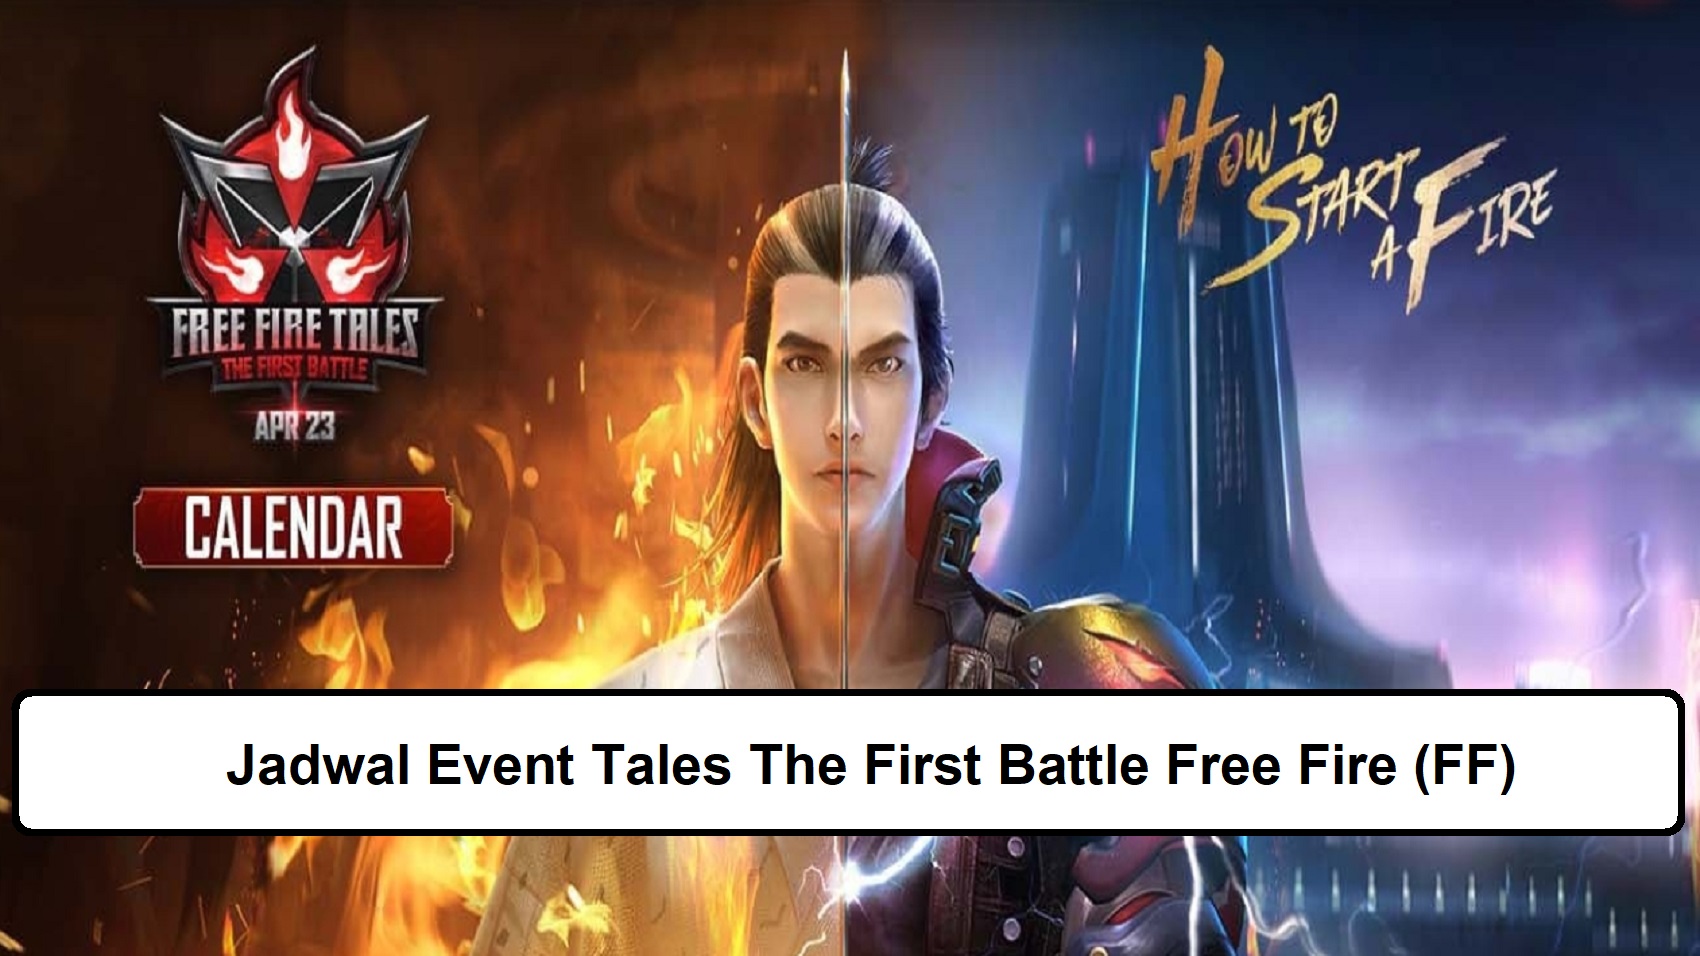 Jadwal Event Tales The First Battle Free Fire (FF)